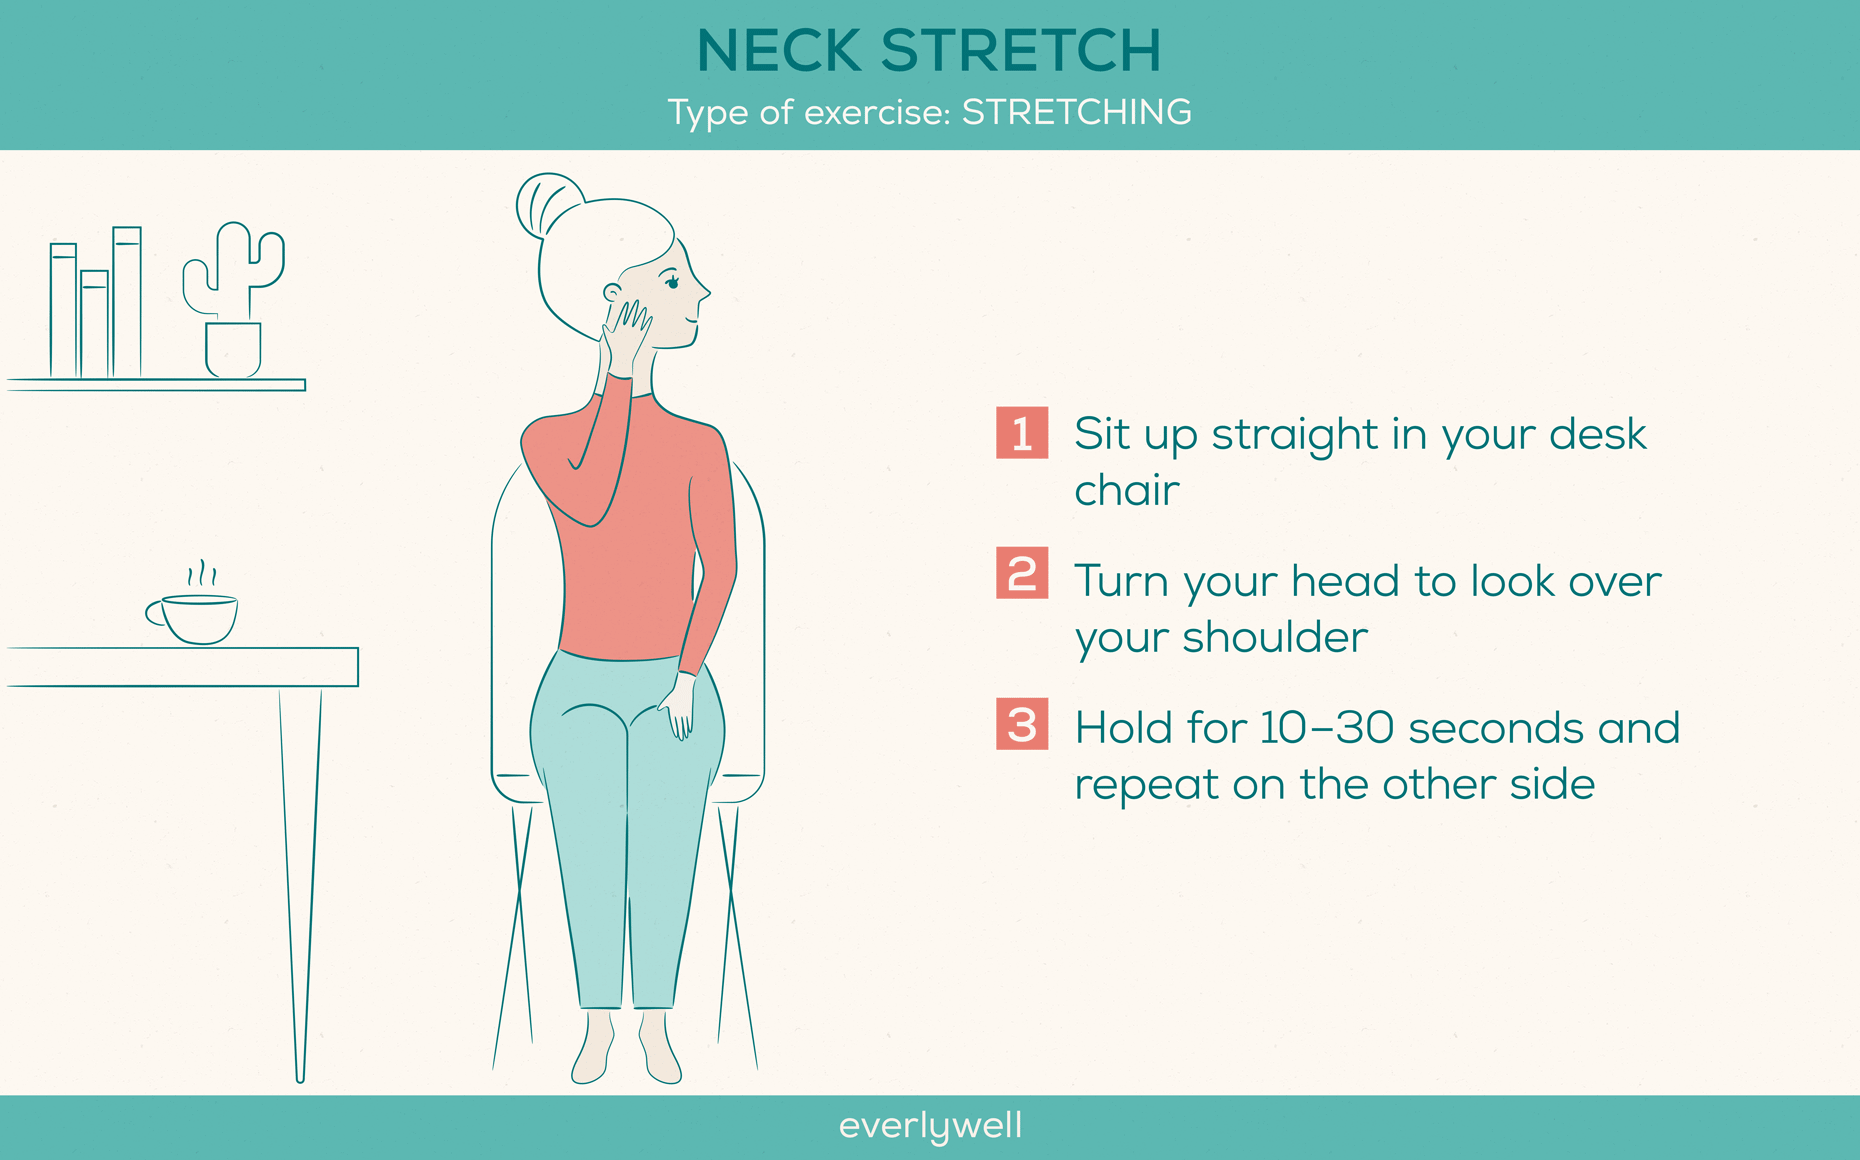 Standing Side Stretch - Heart Health by Design